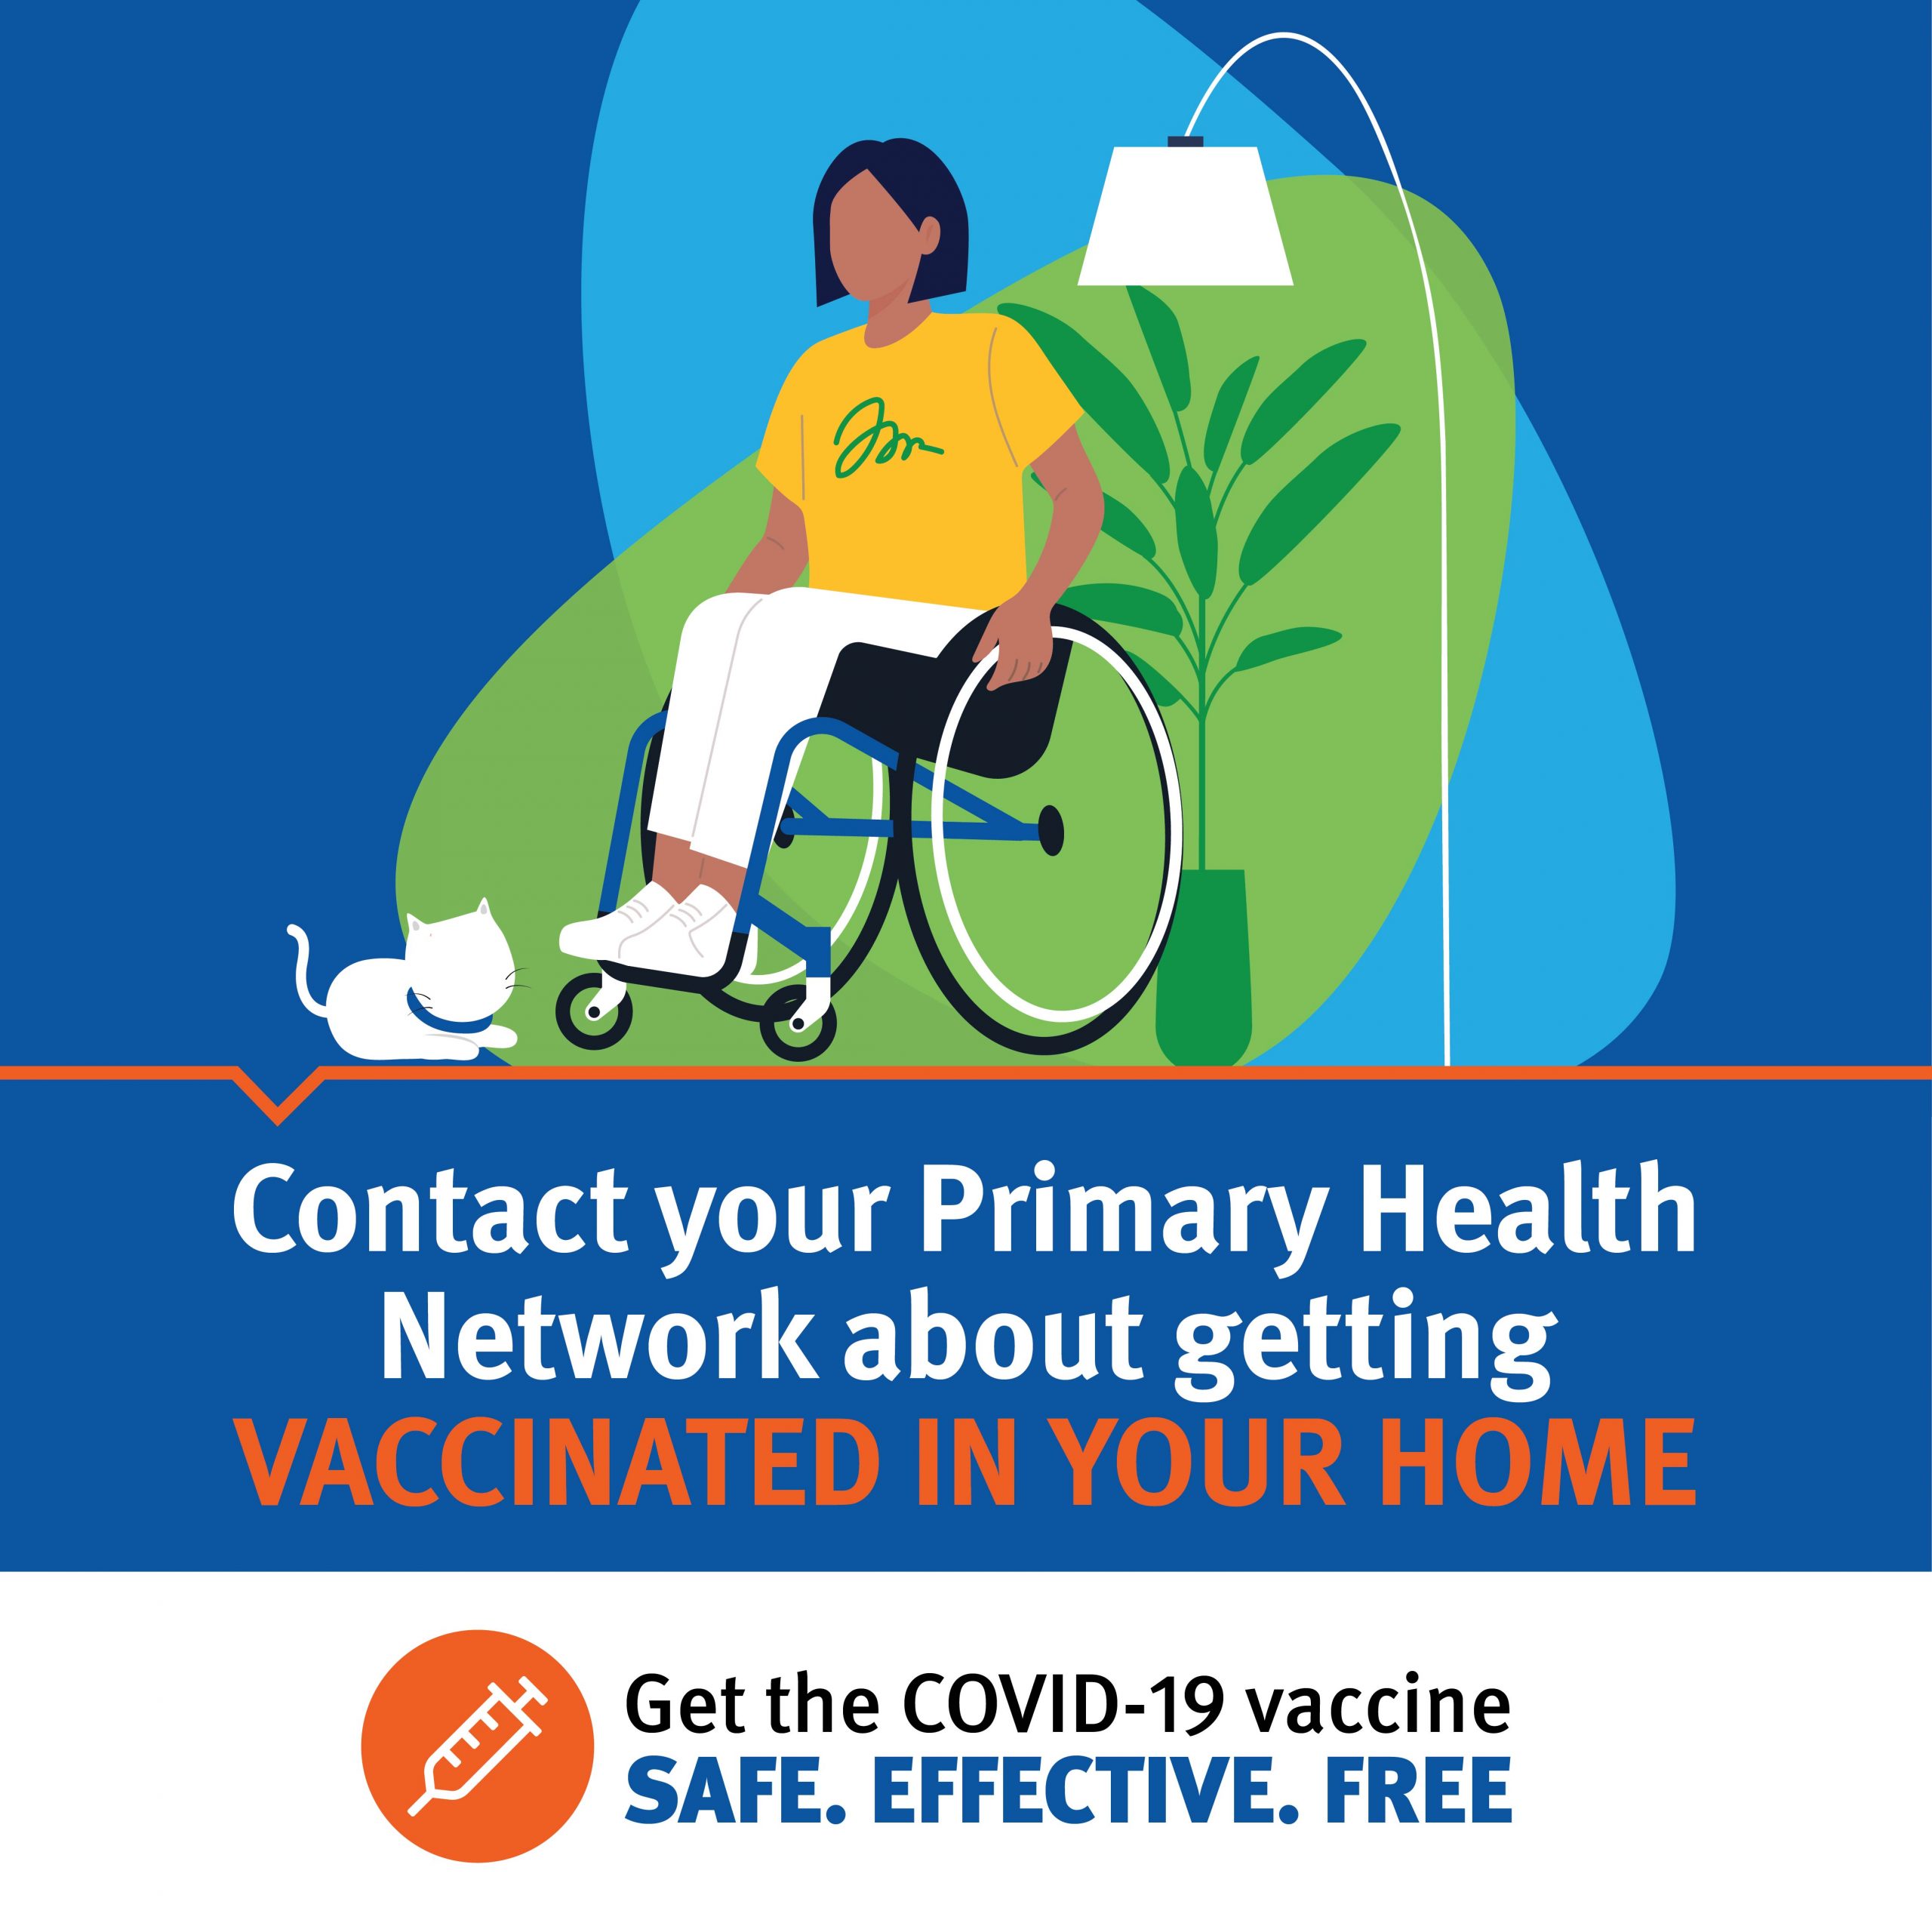 Drawing of a lady in a wheel chair in her home with her cat. The text says Contact your Primary Health Network about getting Vaccinated in your home. Get the Covid-19 Vaccine, Safe, Effective, Free